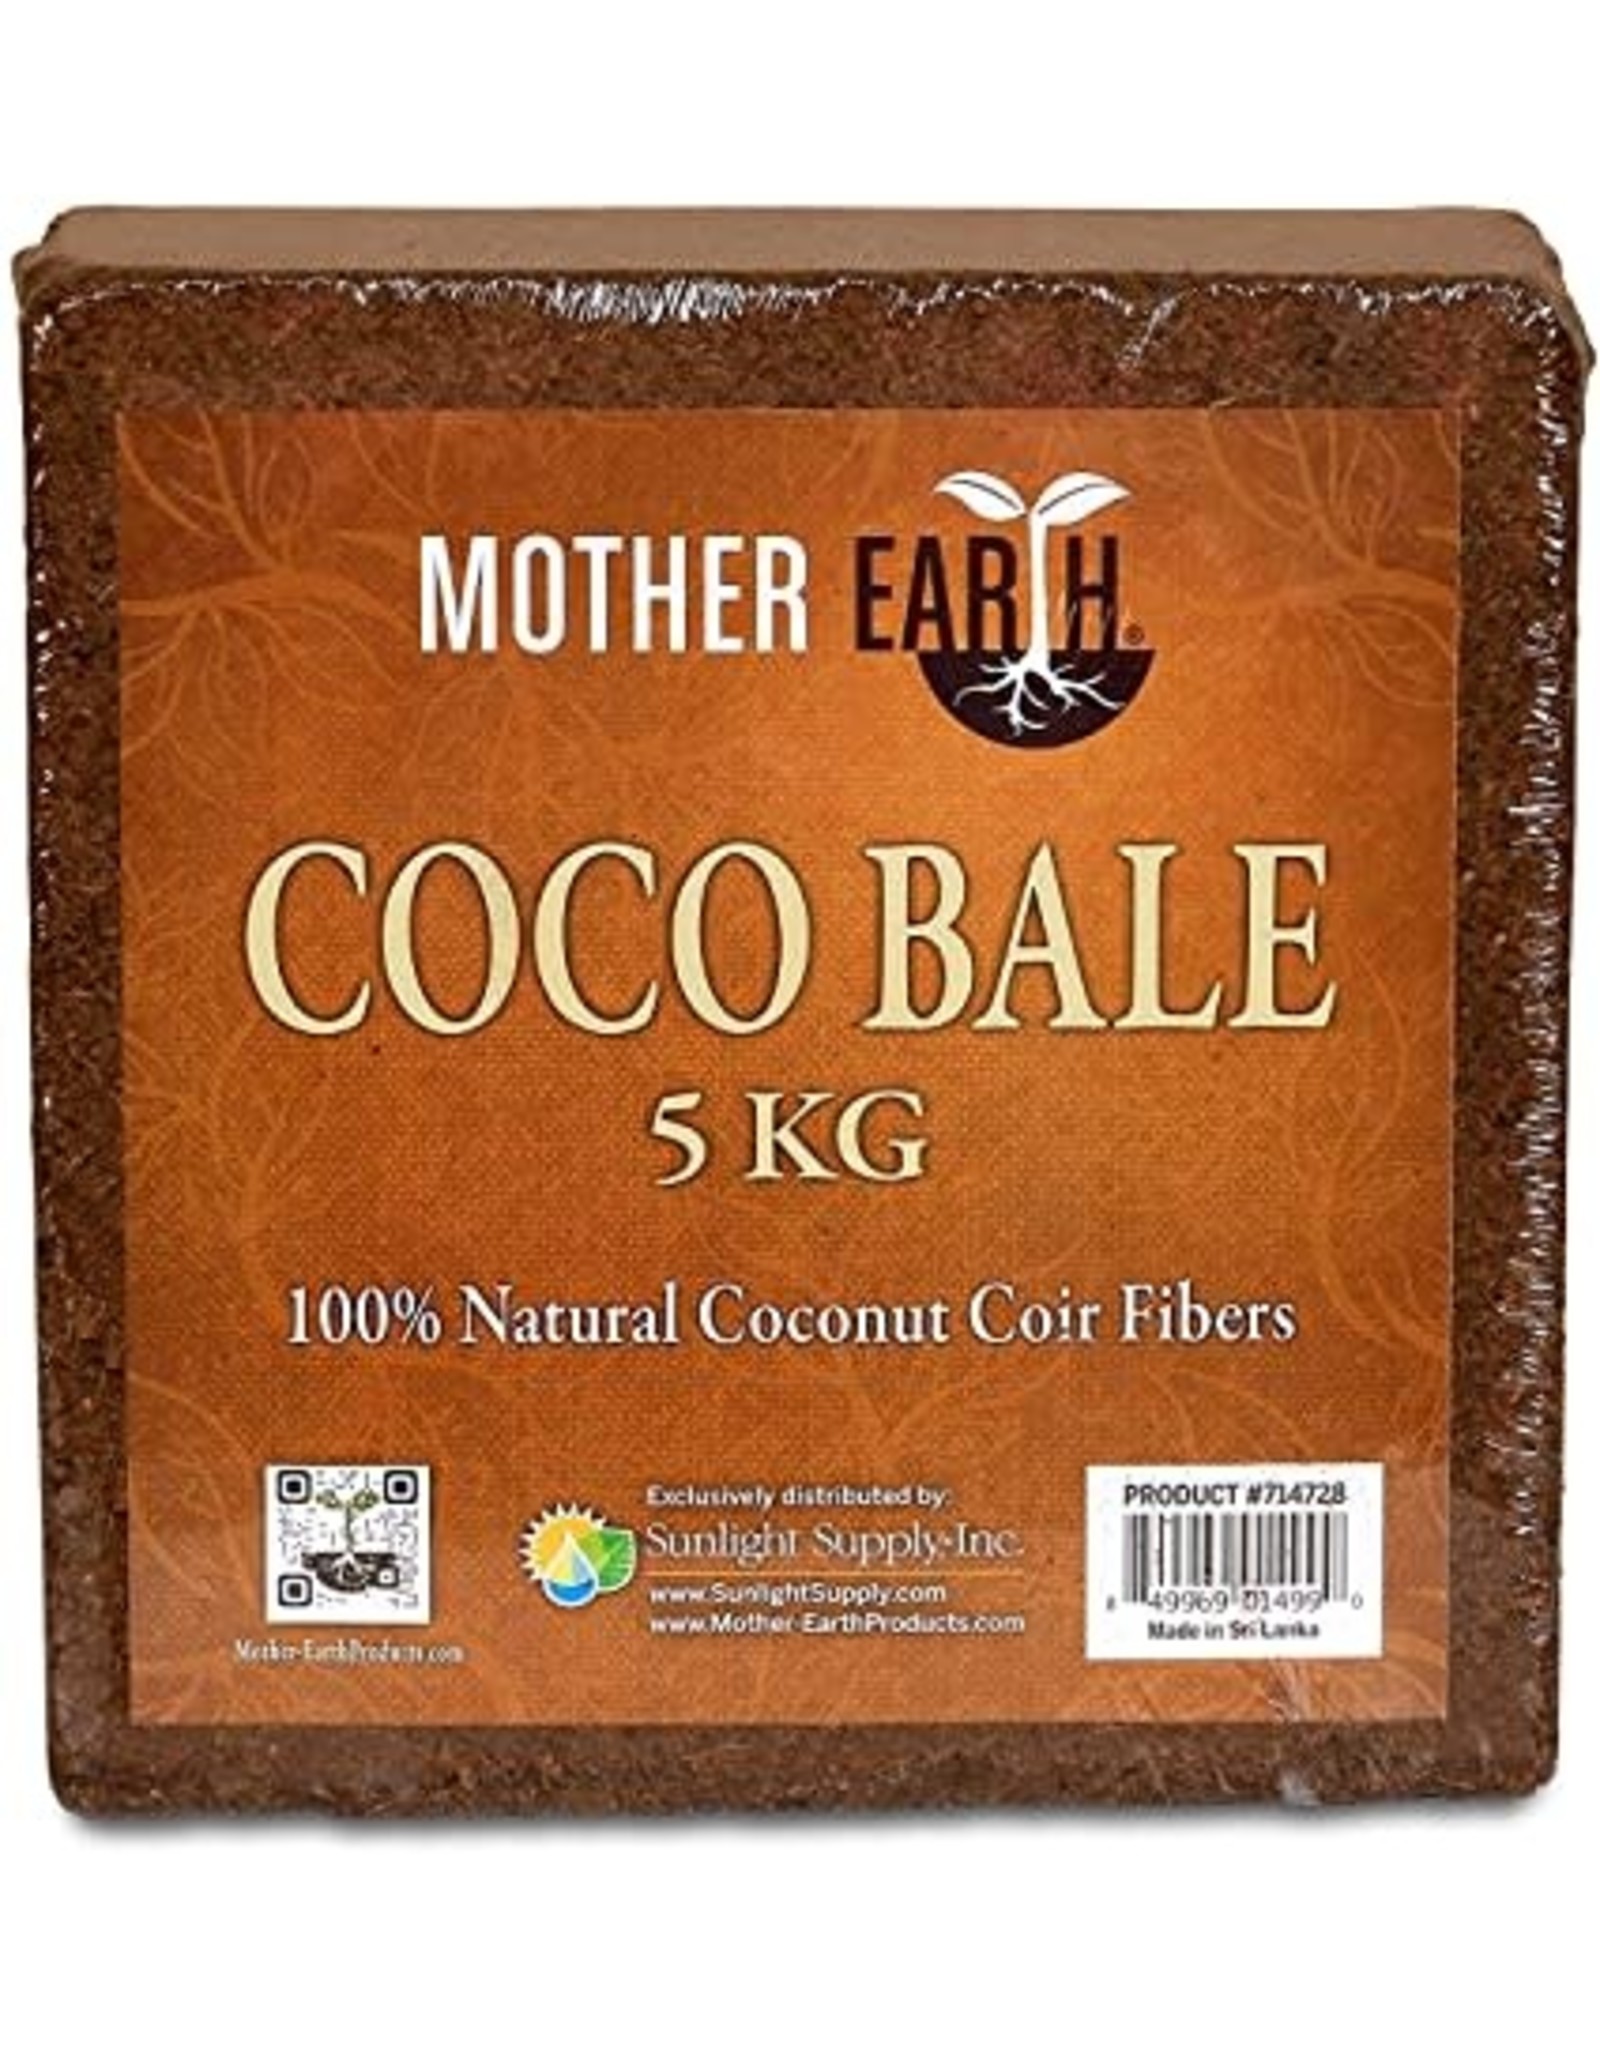 Mother Earth Mother Earth Coco Bale 5kg